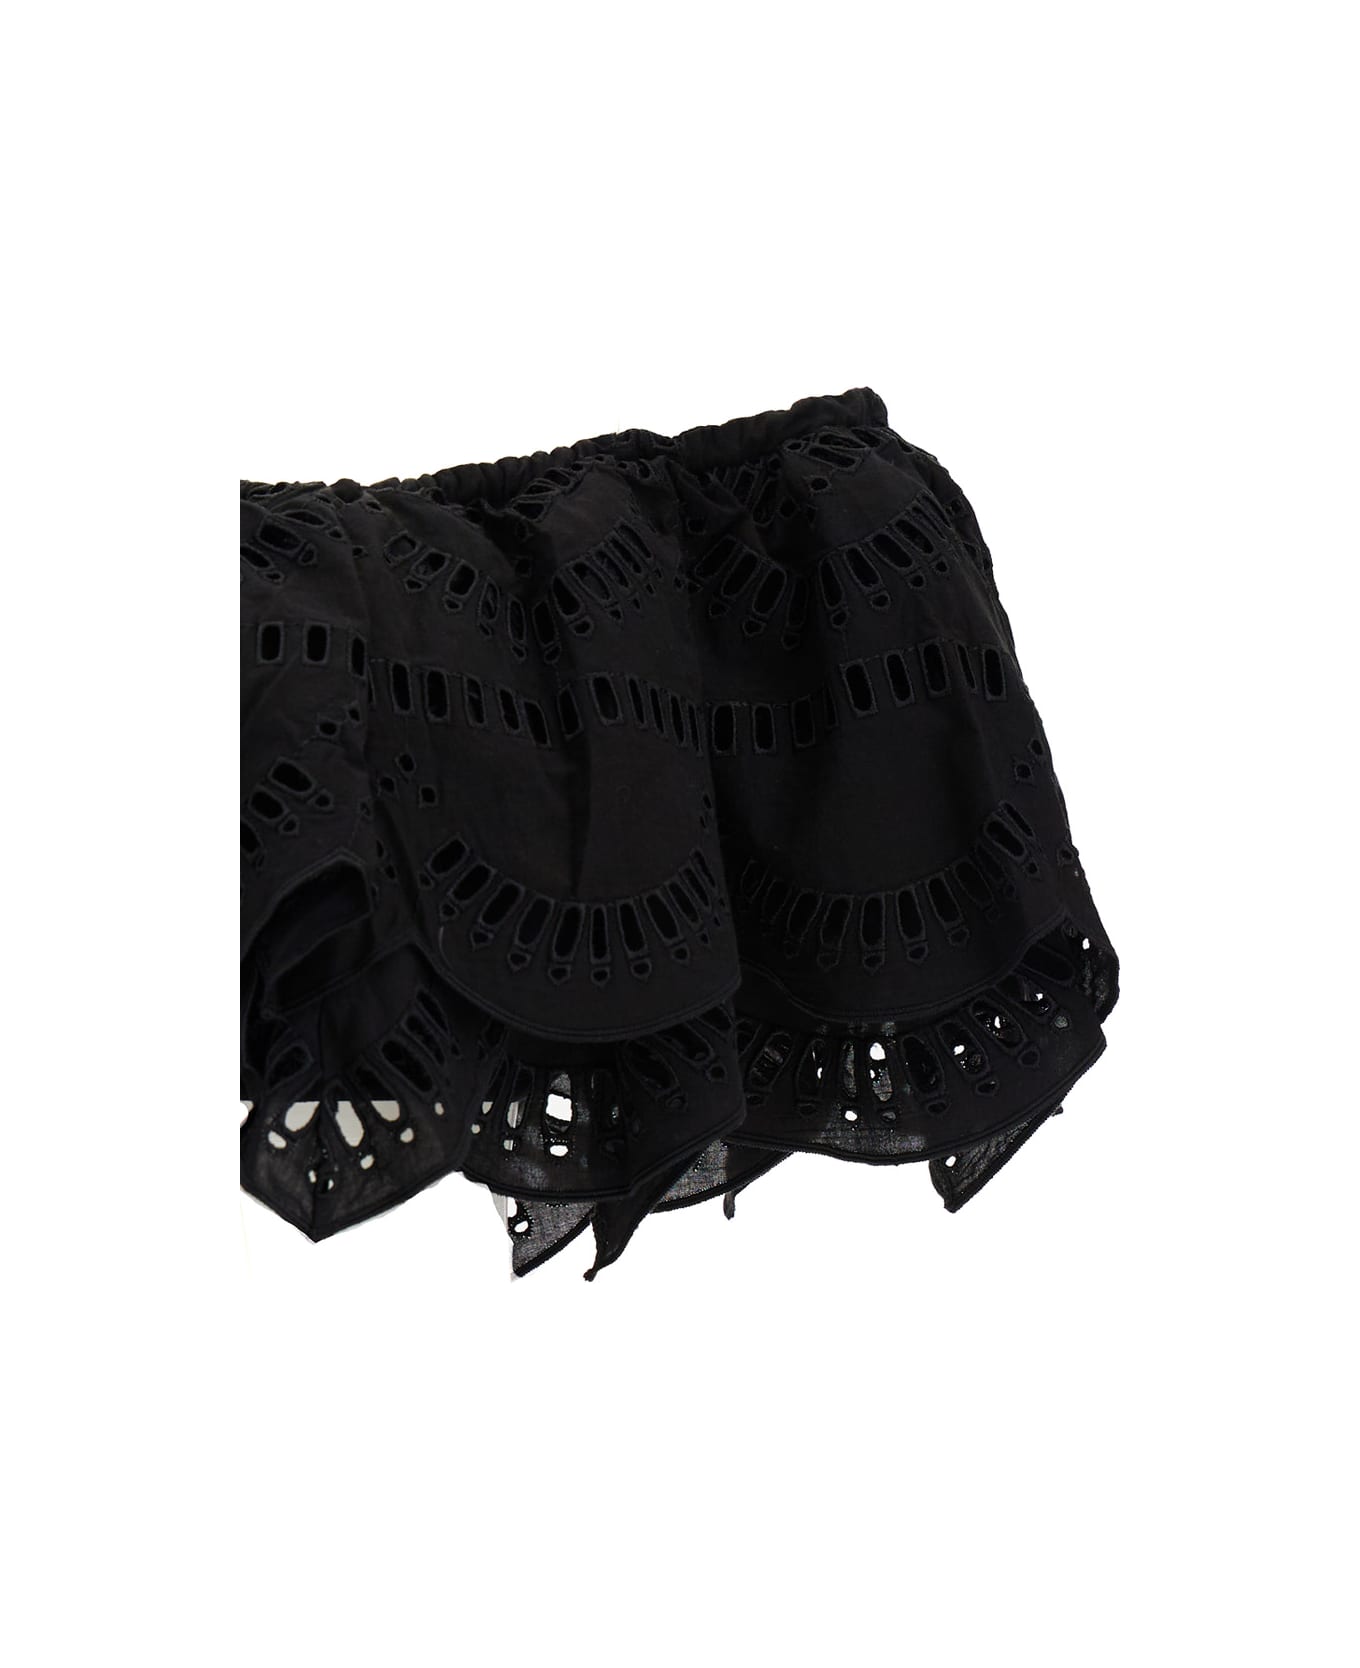 Charo Ruiz 'collyk' Black Off-the-shoulders Top In Cotton Lace Woman - Black トップス